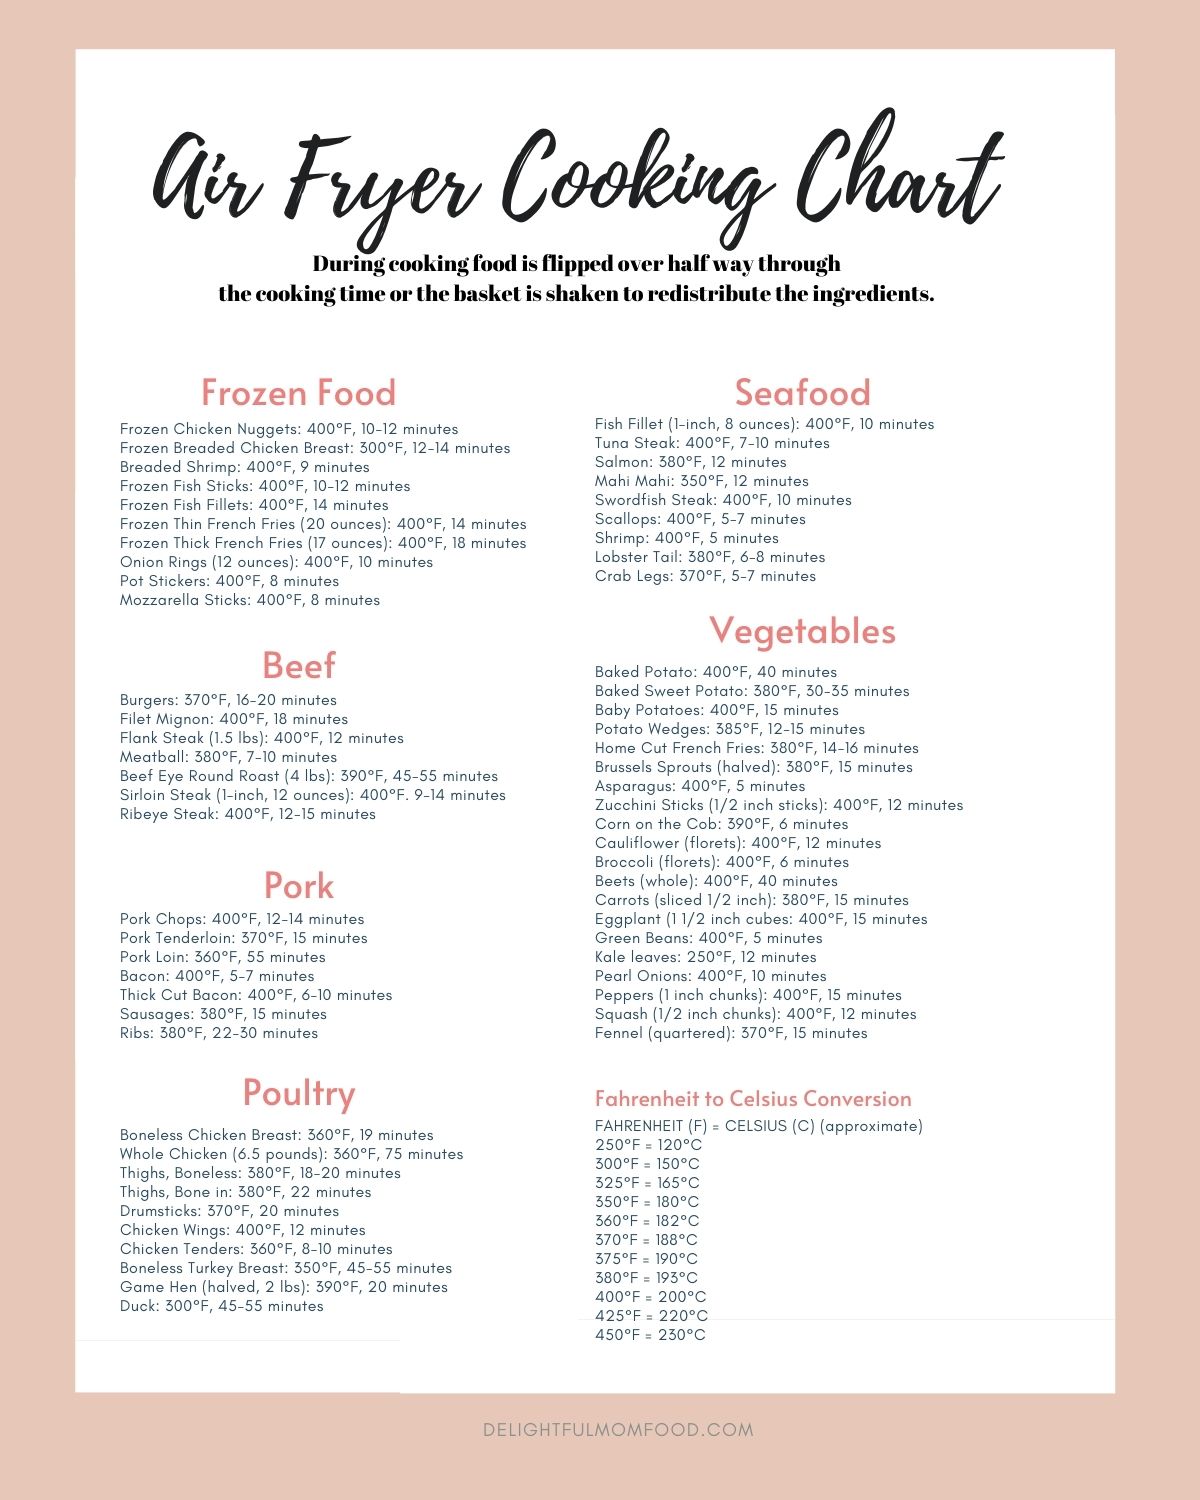 Air Fryer Cooking Chart Delightful Mom Food